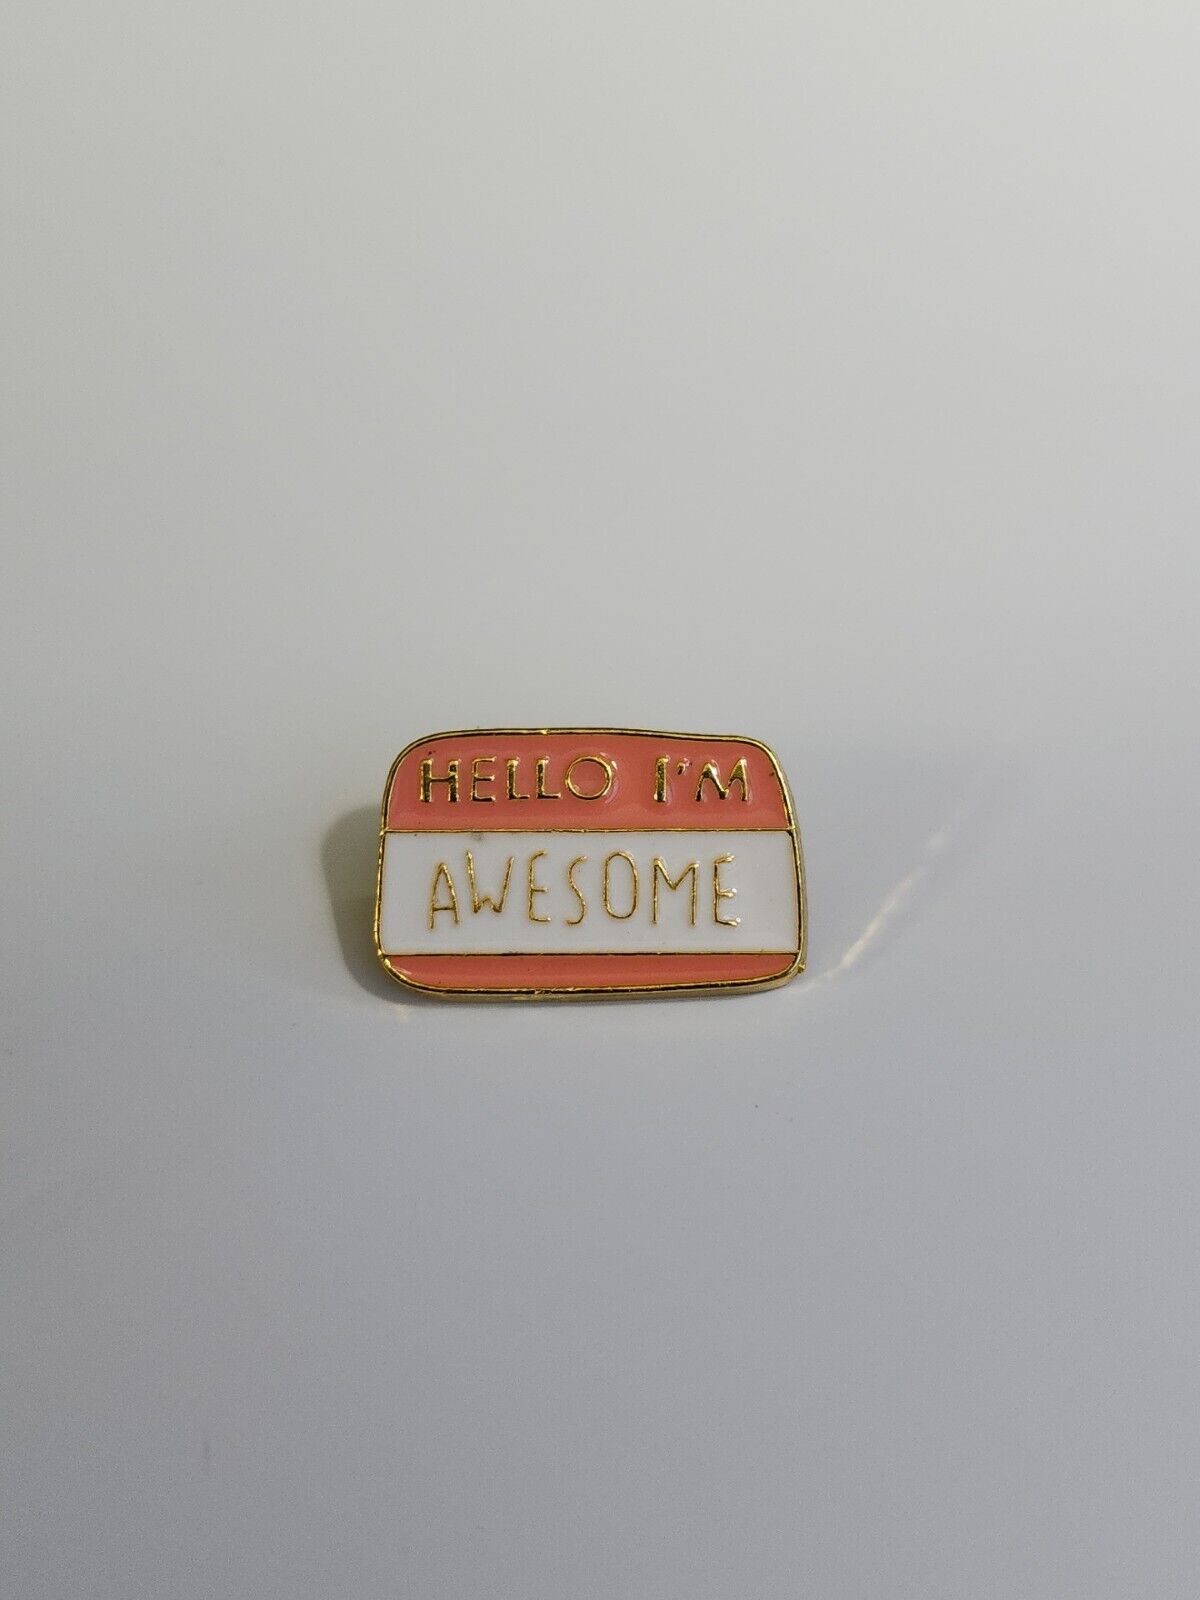 Hello I\'m Awesome Name Tag Lapel Pin Humorous Small Size 